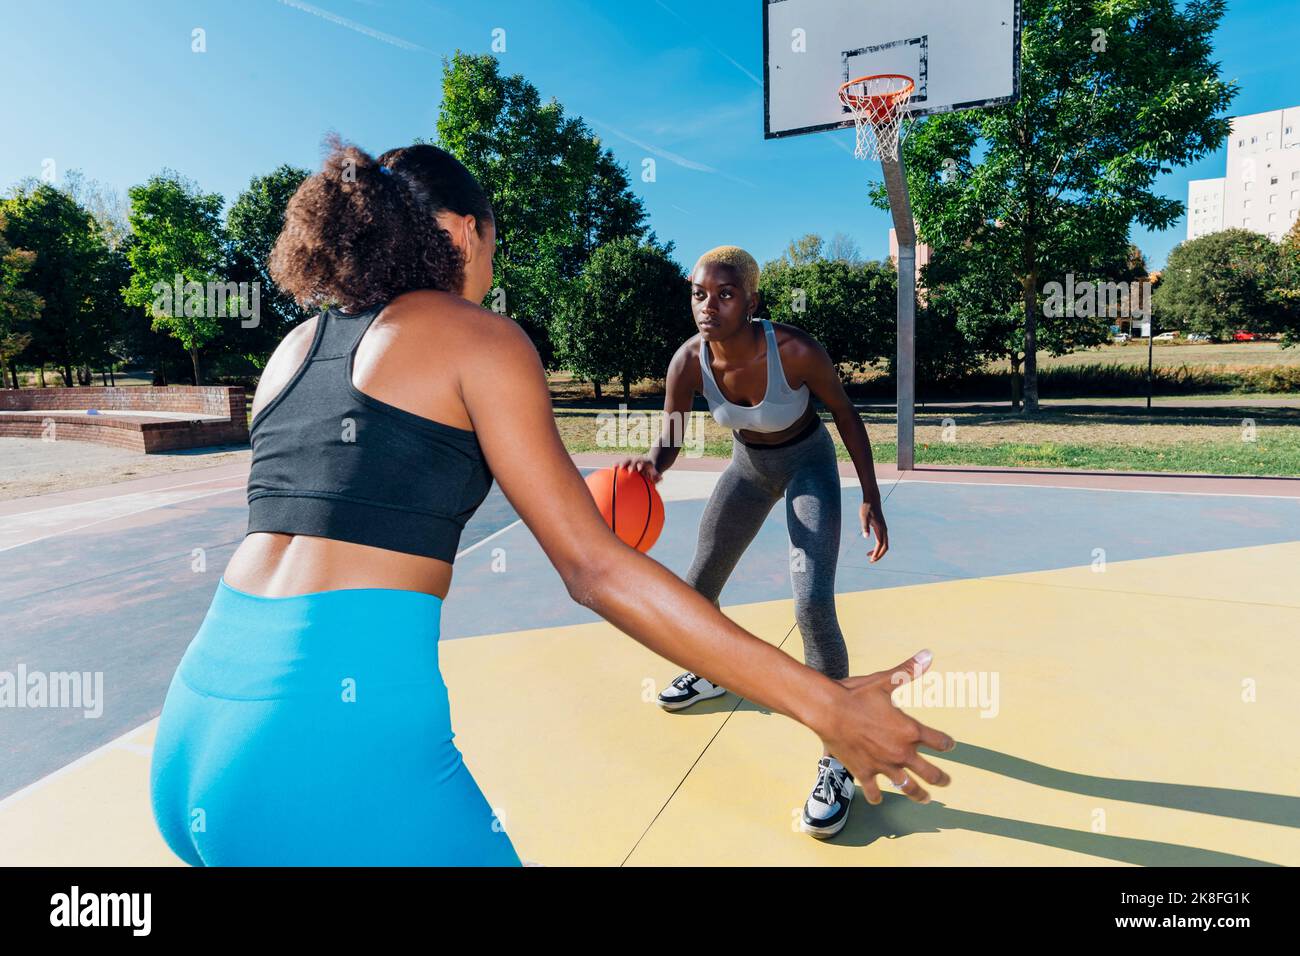 Young sportswoman dribbling basketball playing with friend in sports court Stock Photo